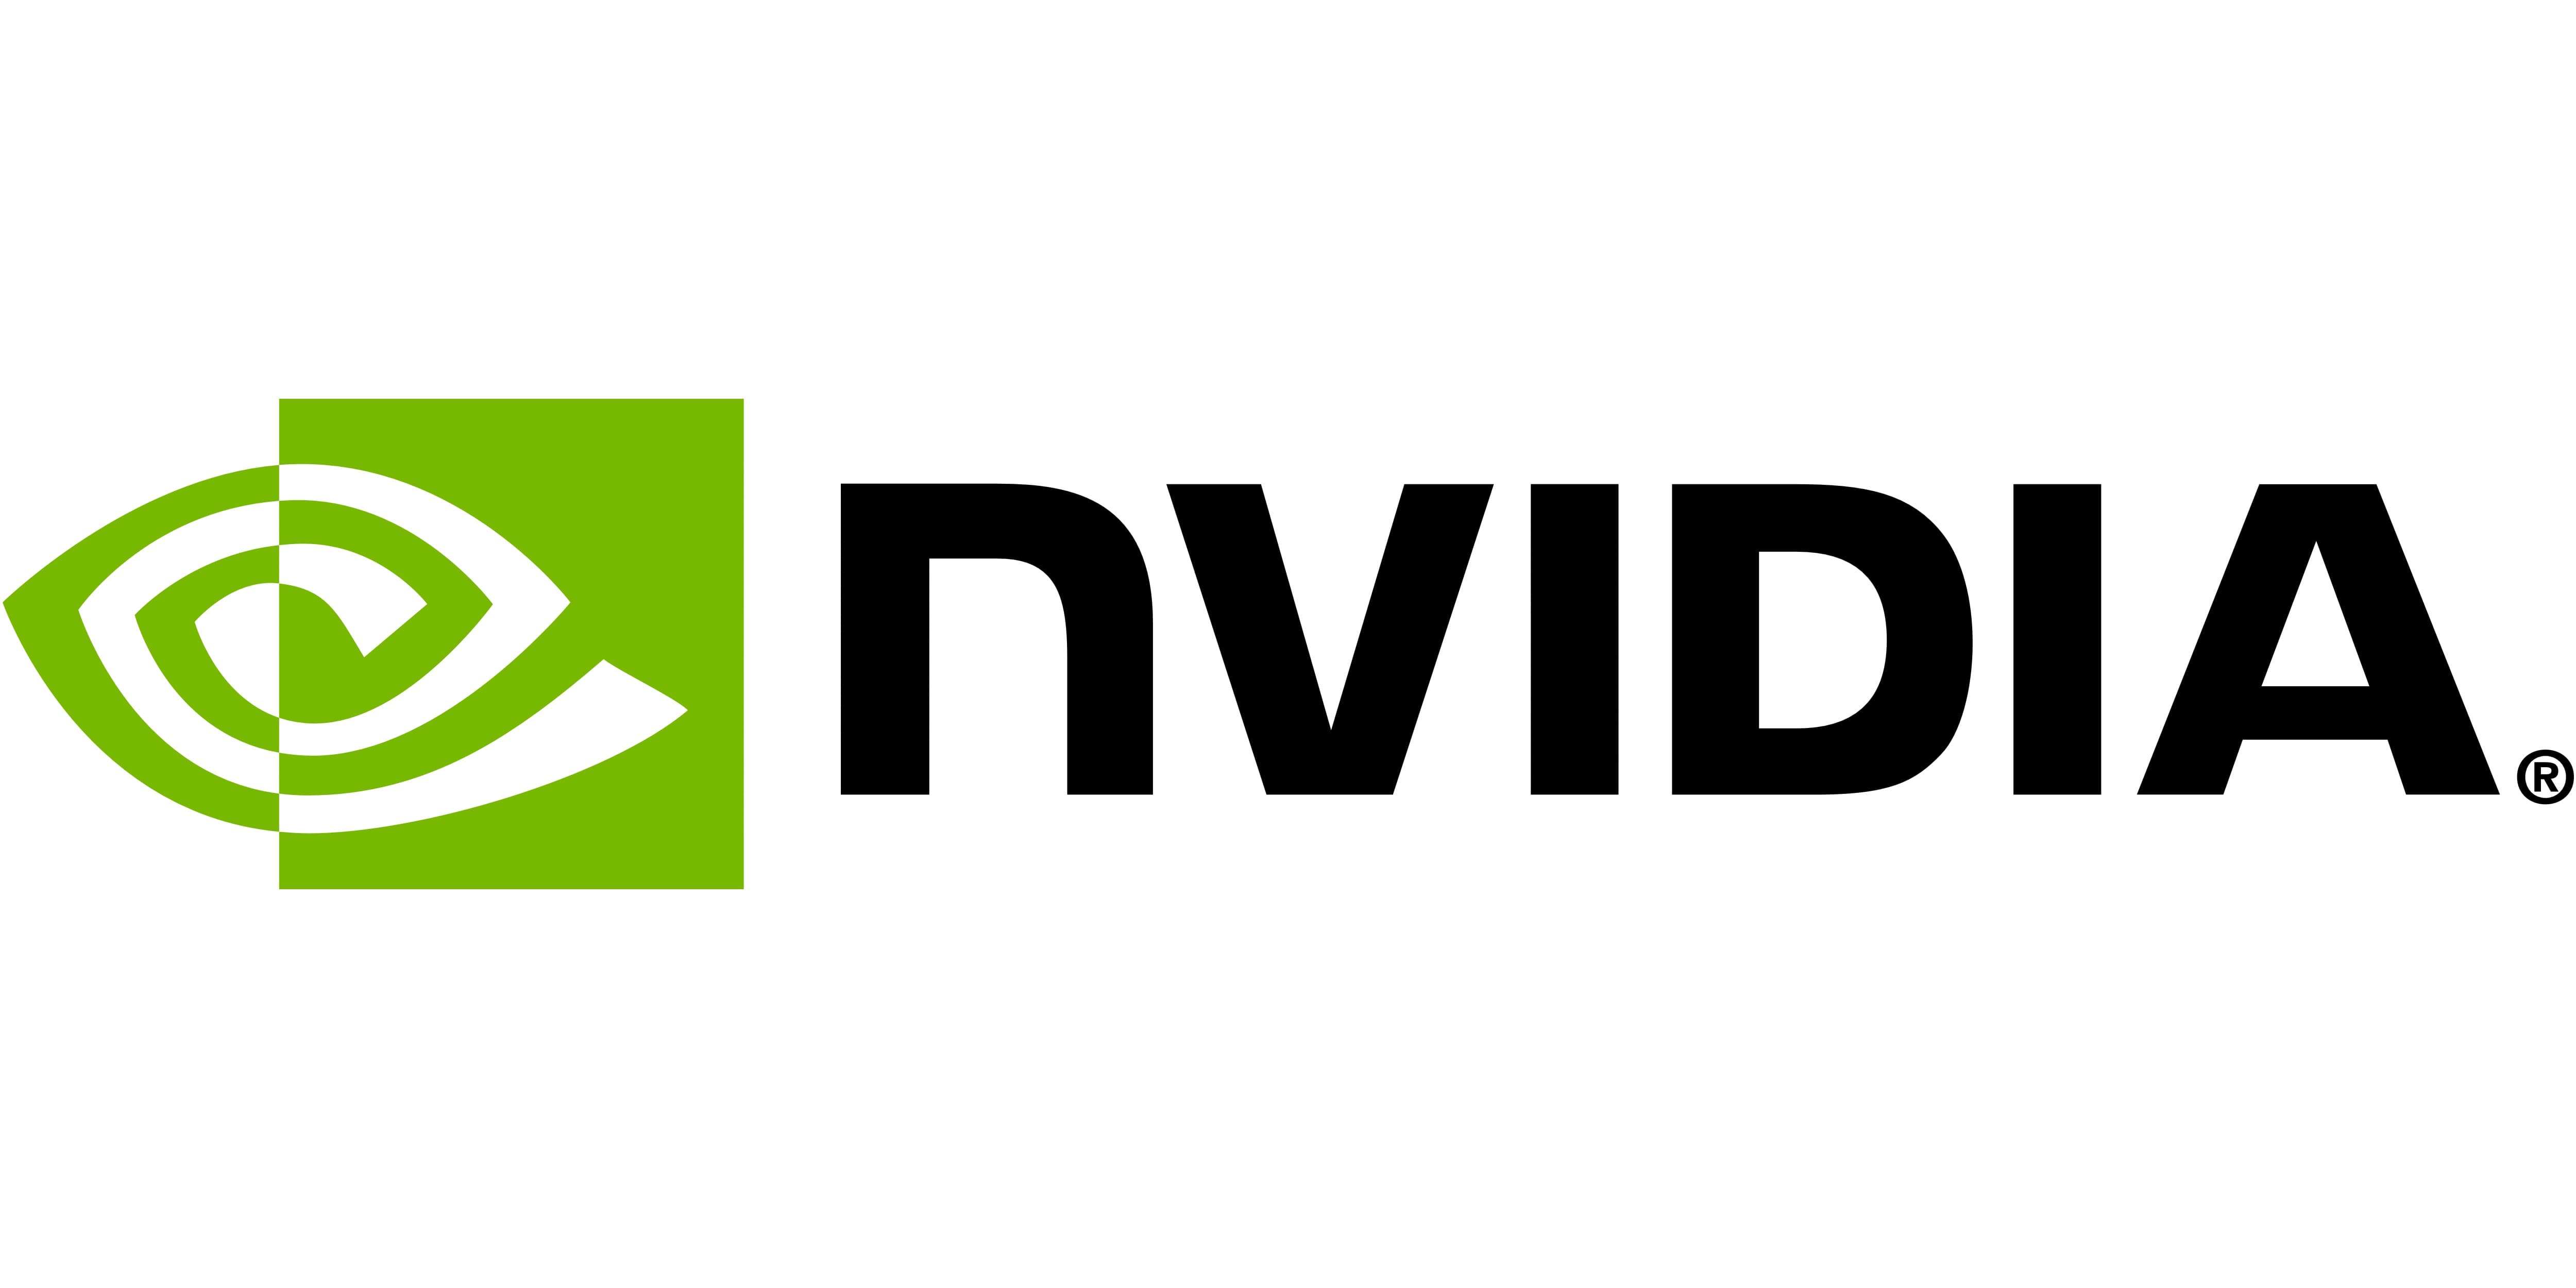 NVIDIA Graphics Private Limited